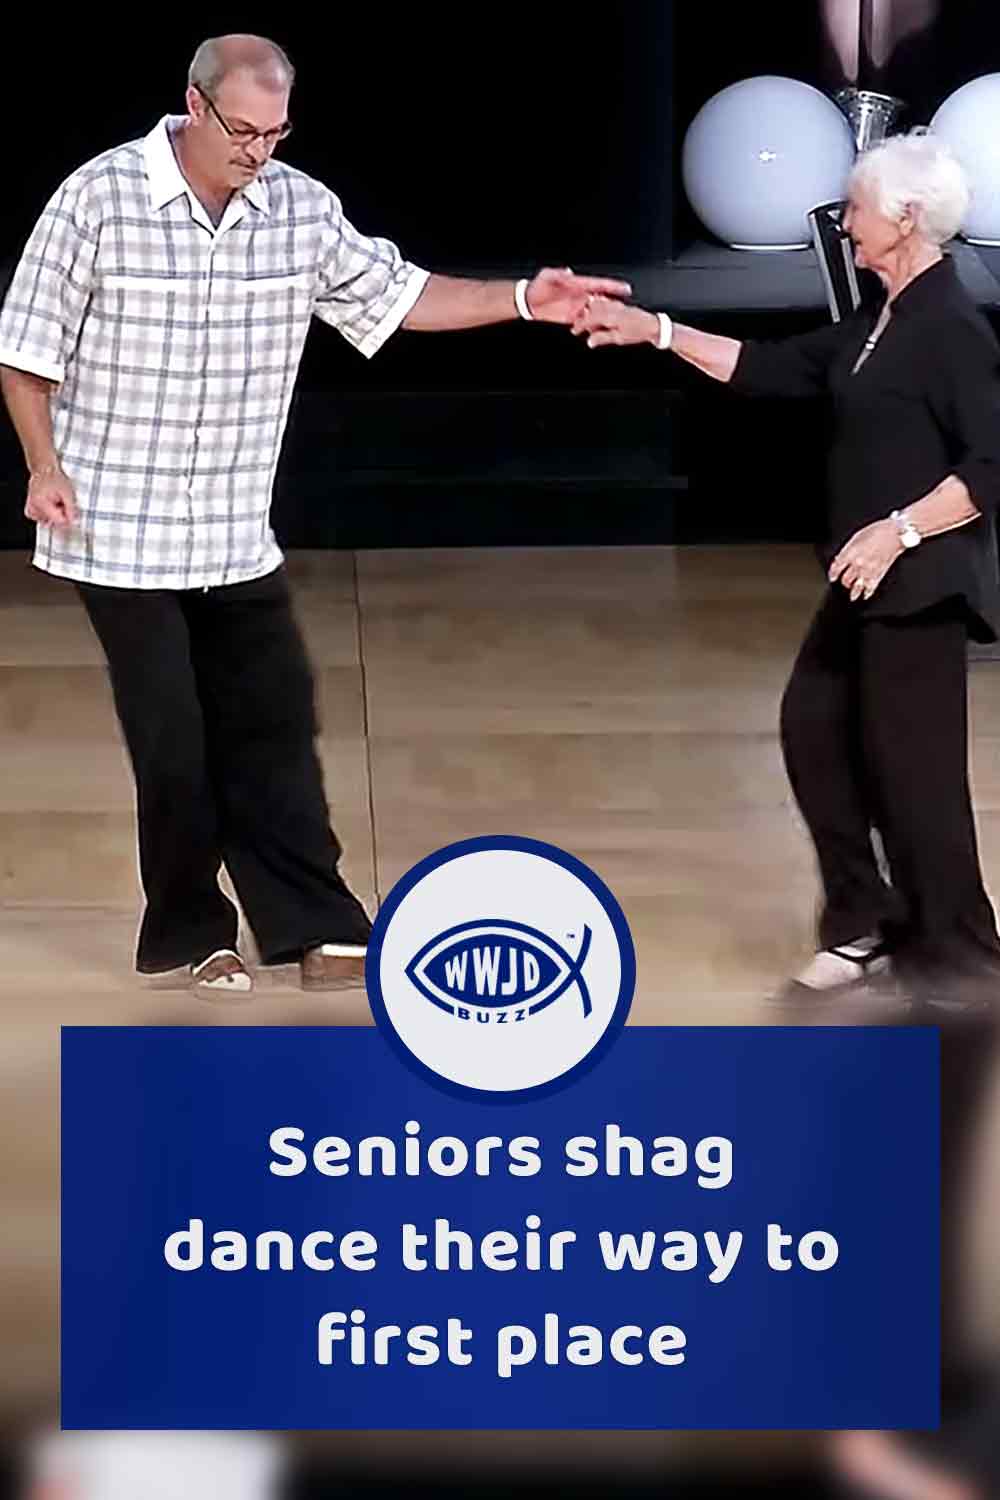 Seniors shag dance their way to first place